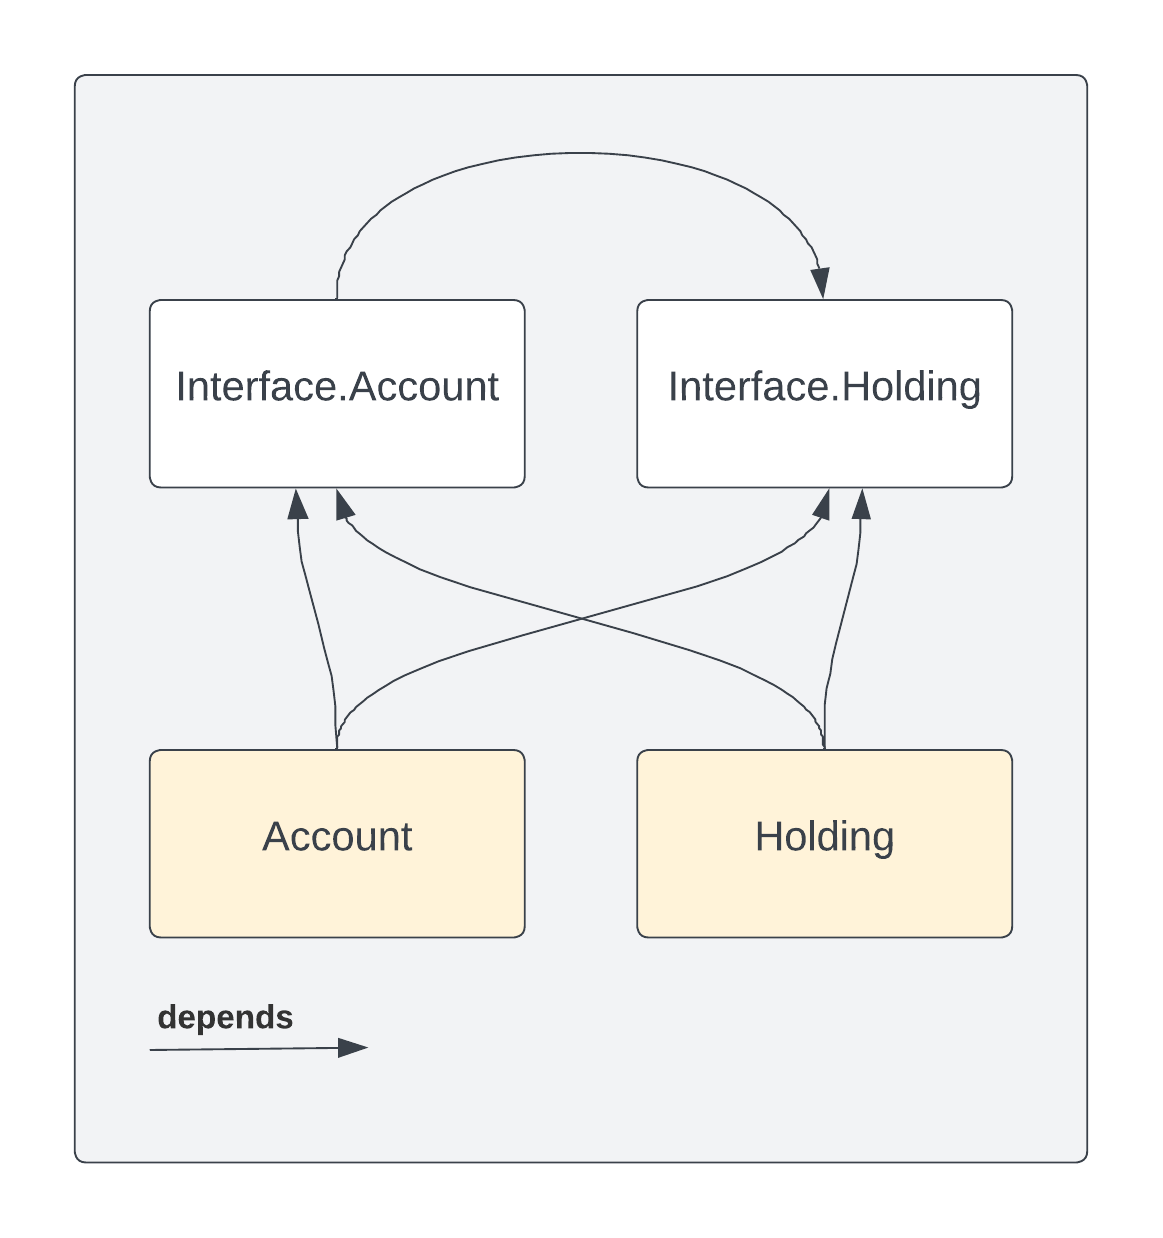 This diagram illustrates the incoming and outgoing dependencies of the account and holding implementation and interface packages.